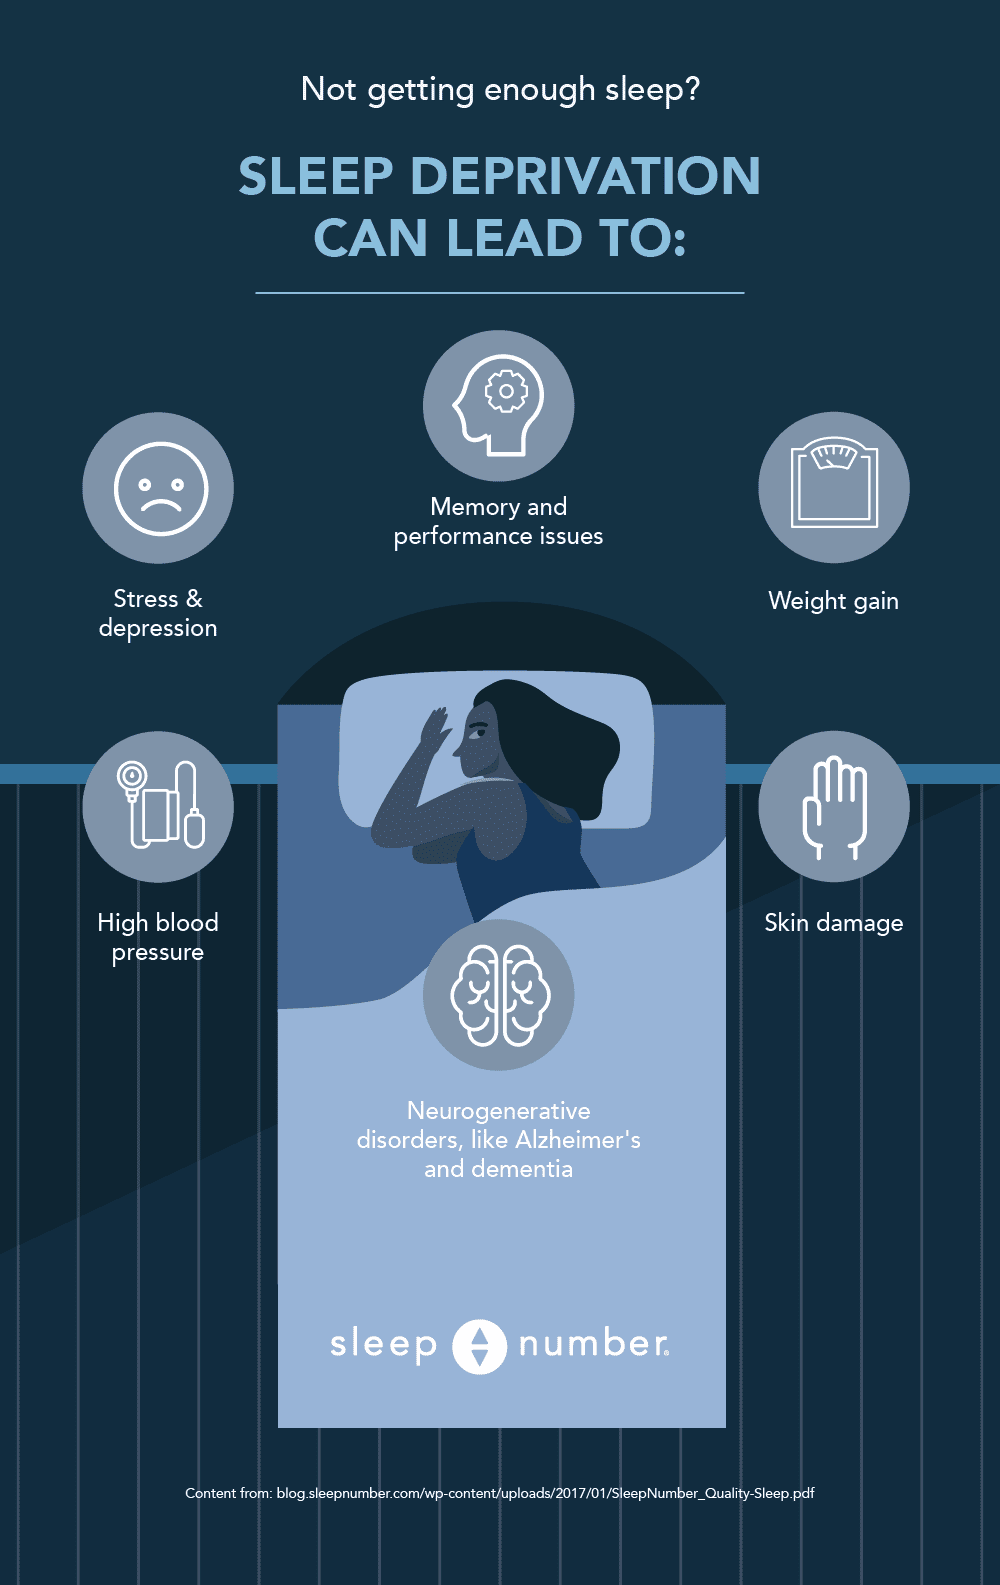 Effects of Sleep Deprivation